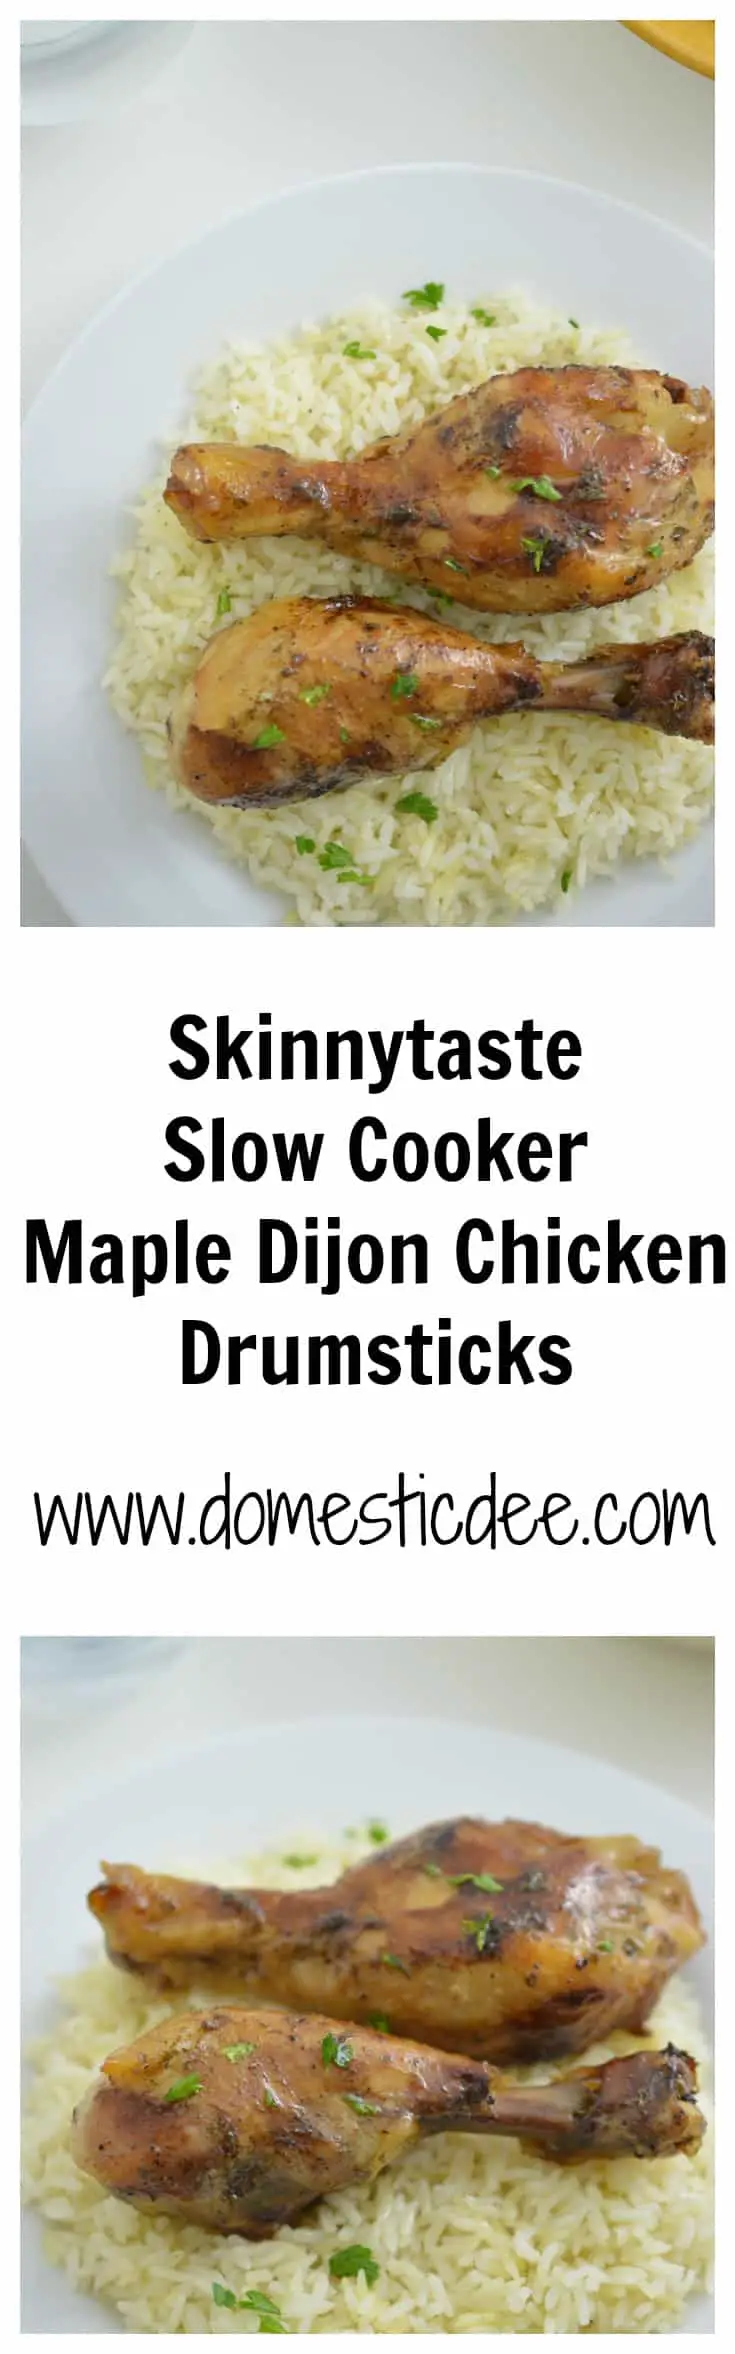 Skinnytaste Slow Cooker Maple Dijon Chicken Drumsticks-This delicious maple dijon chicken is cooked in the slow cooker